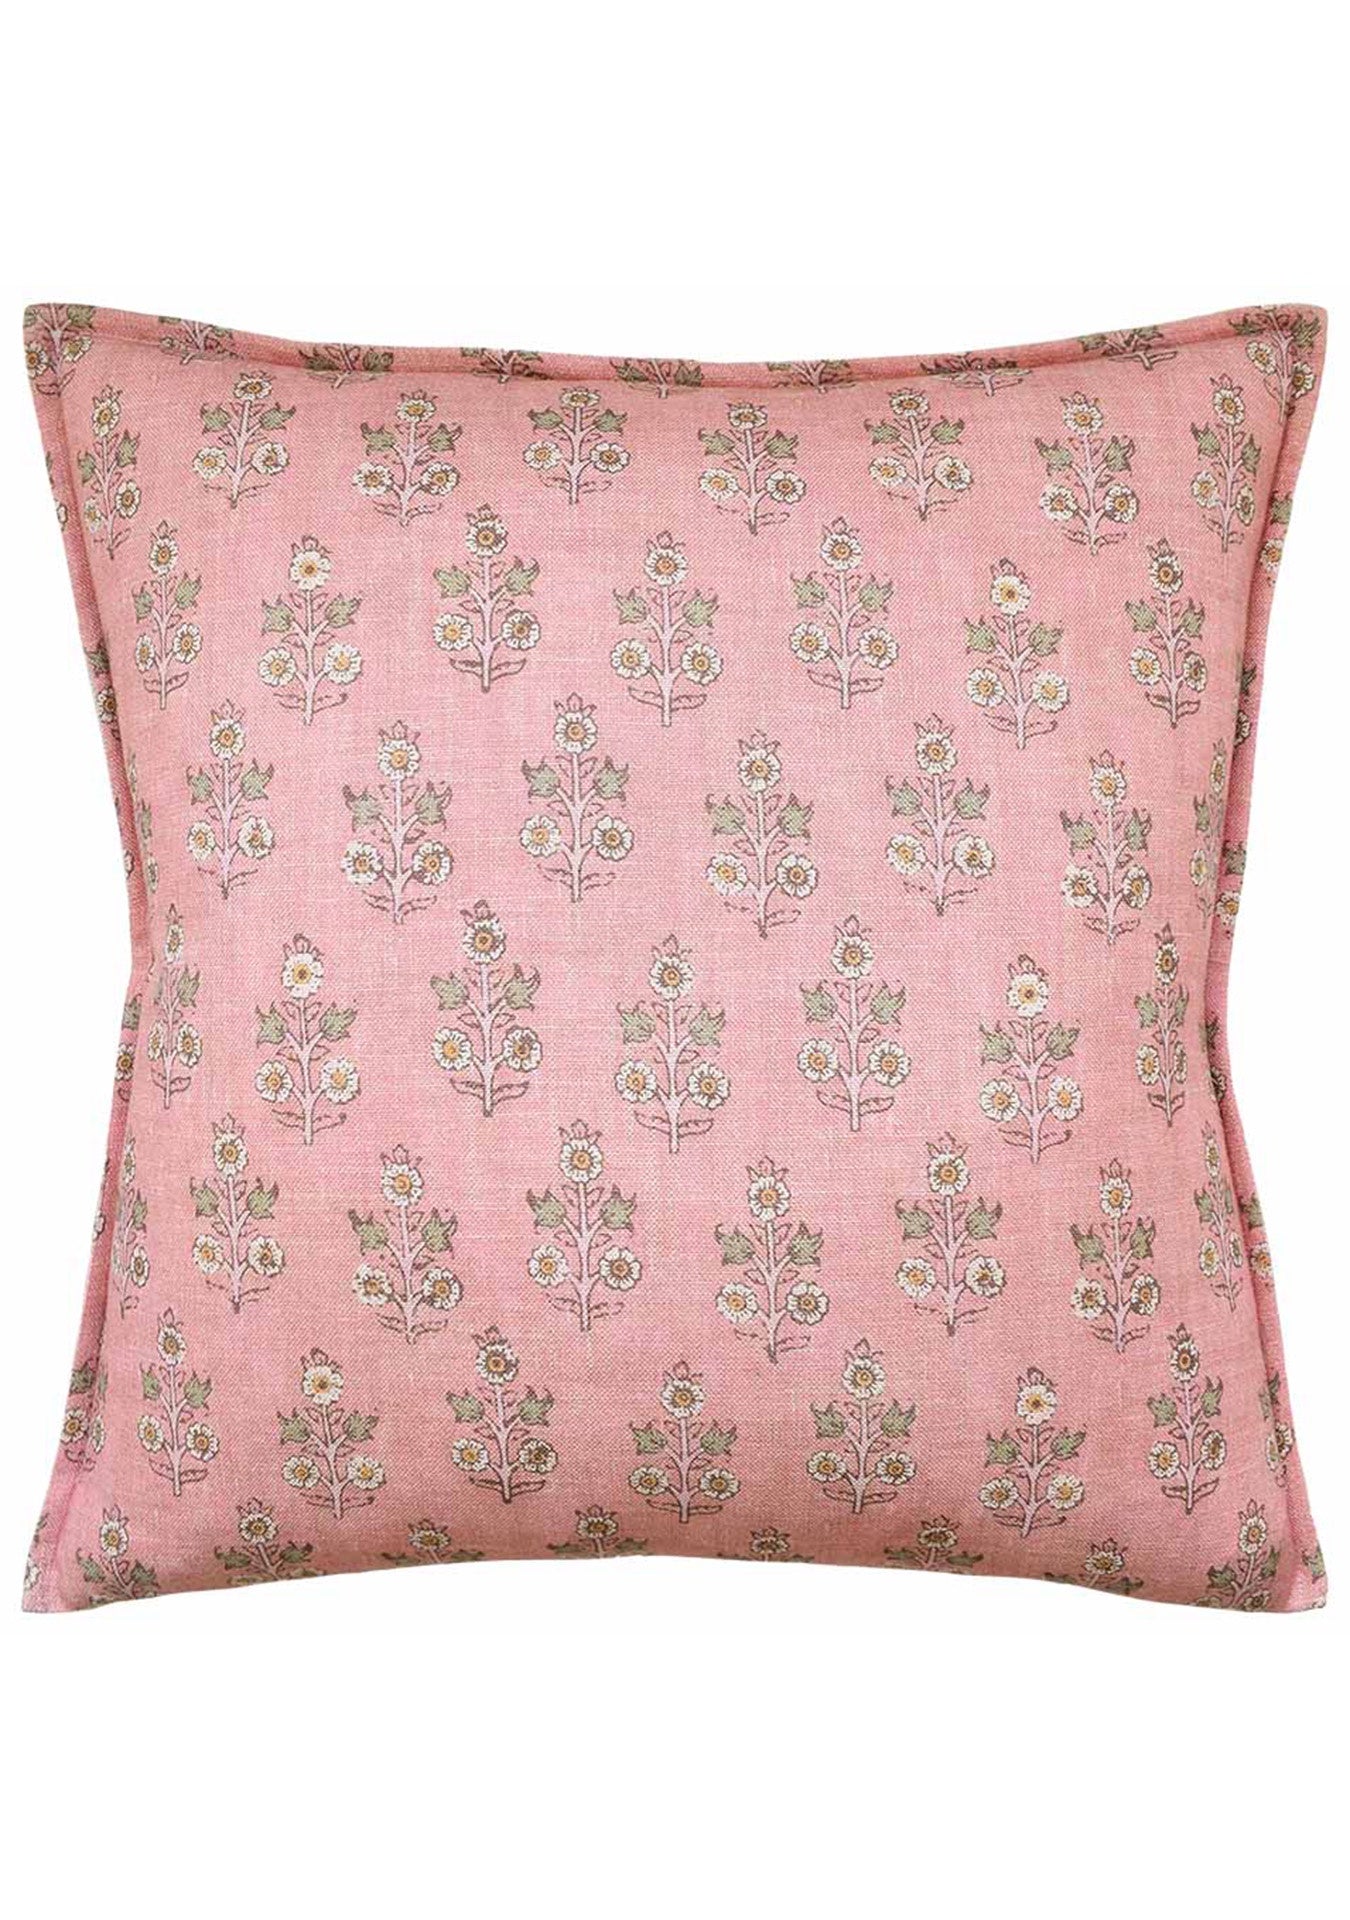 Decorative Poppy Spring Blush 22x22" cushion by Ryan Studio with a detailed floral pattern in gold and green tones, edged with a thin, subtle border, perfect for any Scottsdale bungalow.